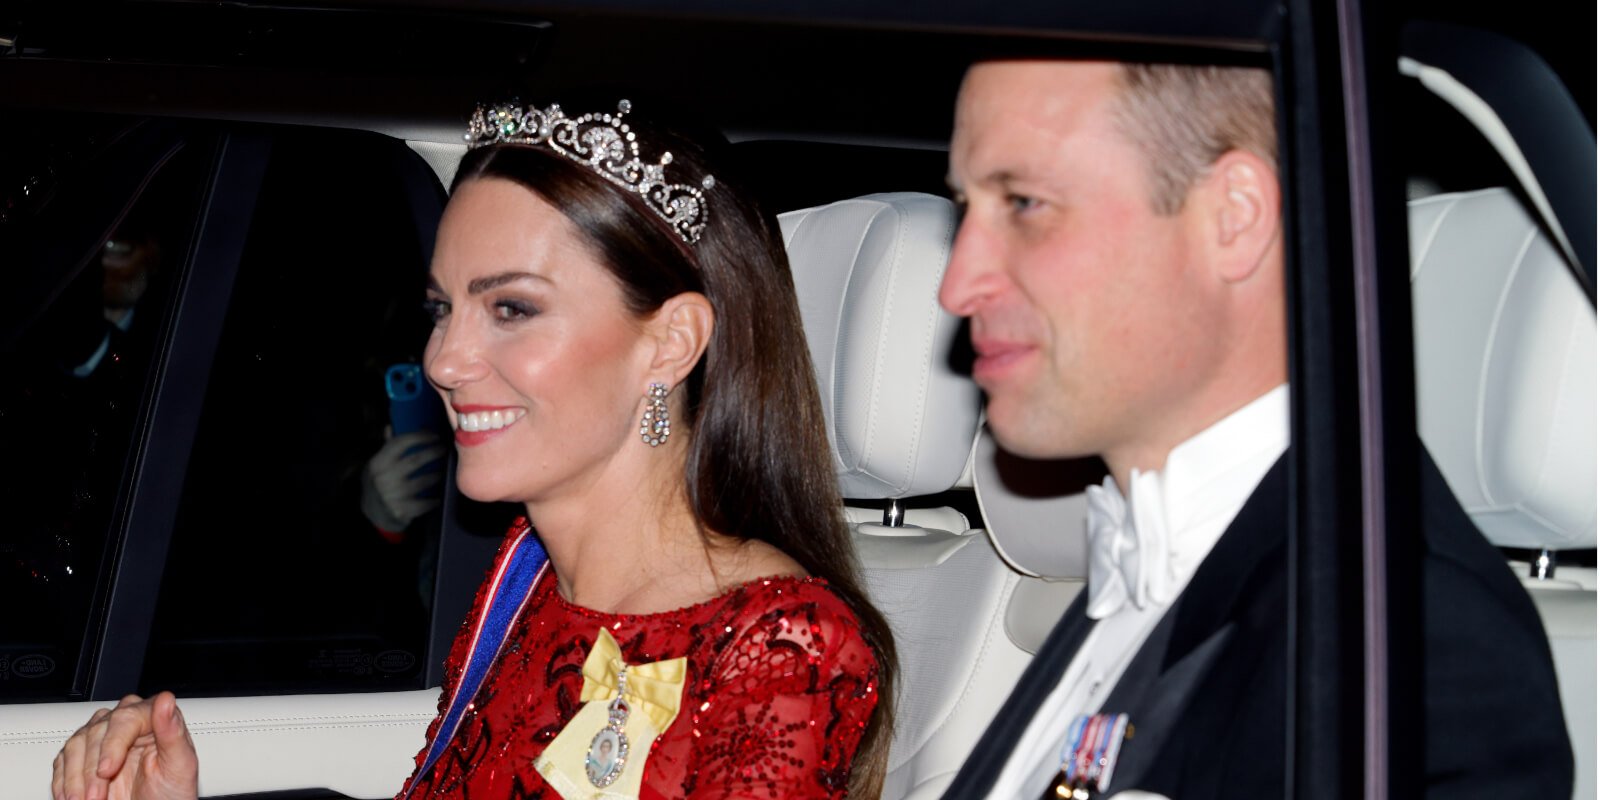 Kate Middleton and Prince William attend the annual Reception for Members of the Diplomatic Corps at Buckingham Palace on December 6, 2022 in London, England.